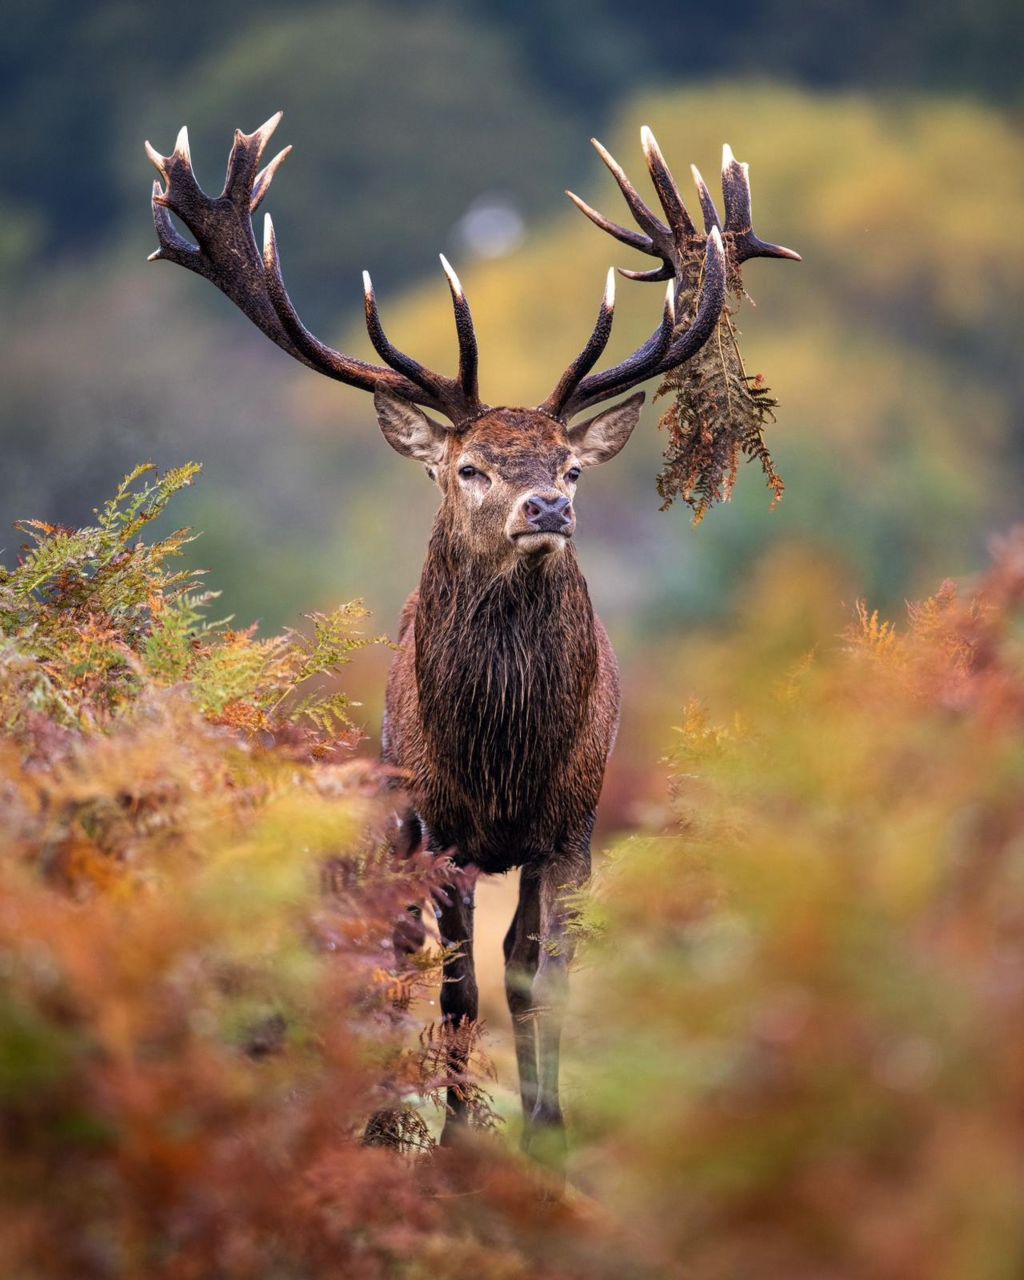 A stag stands in the bracken with leaves on its antlers